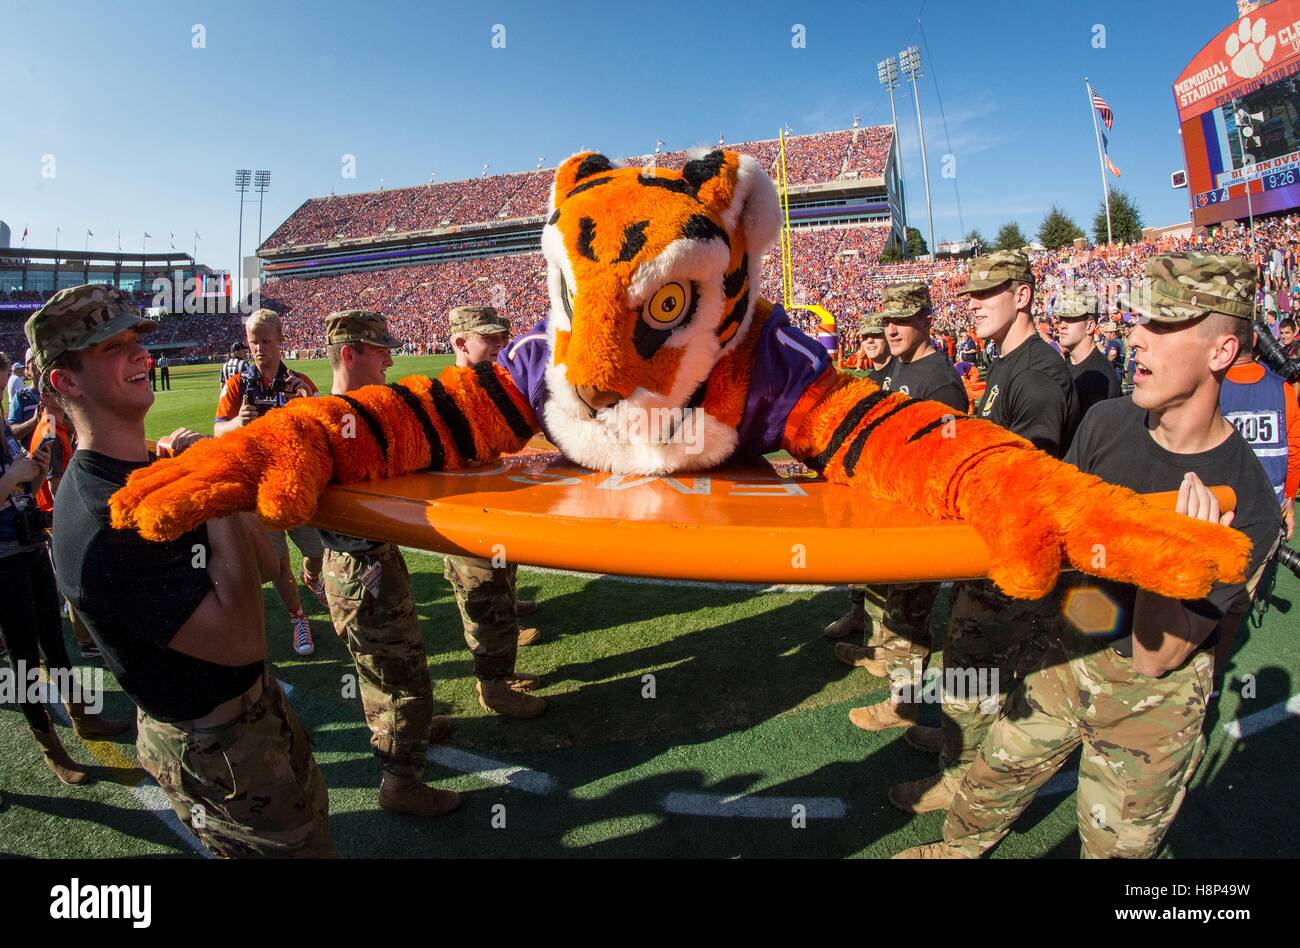 Clemson University Reserve Officers Training Corps cadets hold up the Clemson Tiger mascot so it can do push-ups to celebrate Clemson scoring a touchdown during the Military Appreciation Game against Syracuse University at the Clemson Memorial Stadium November 5, 2016 in Clemson, South Carolina. Stock Photo